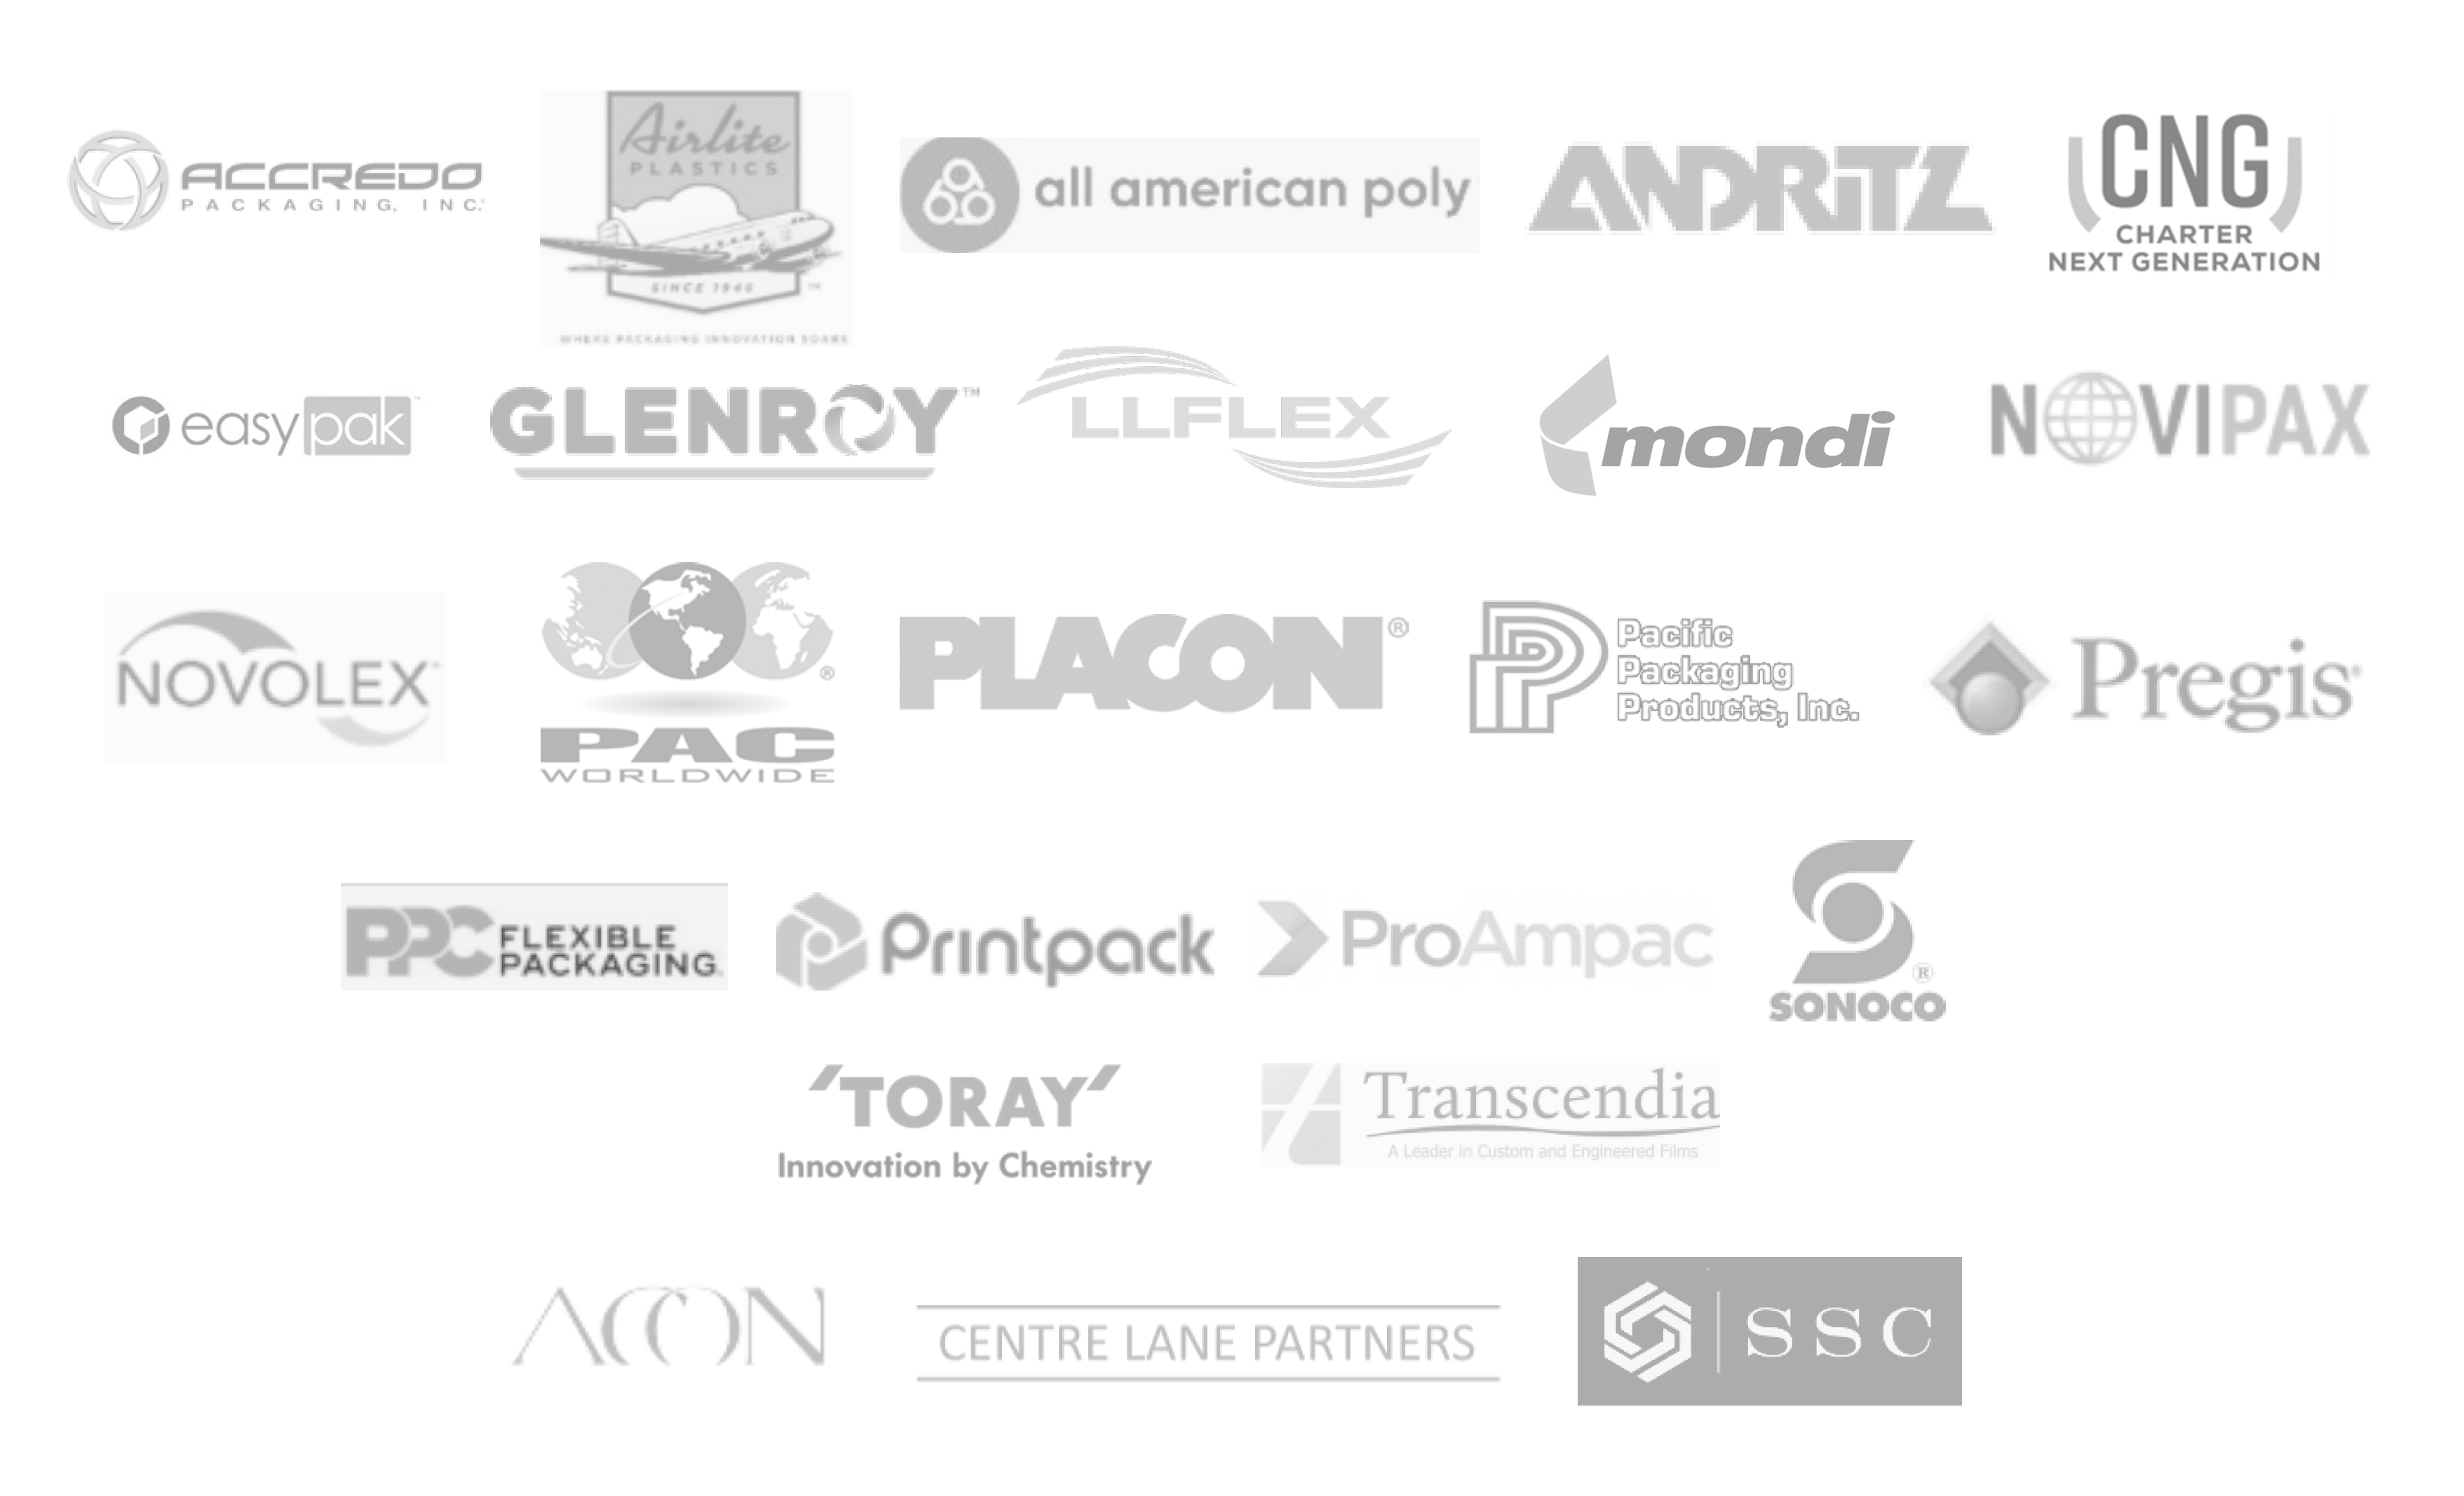 IMAGE OF COMPANIES THAT ARE LEADING THE WAY IN PACKAGING